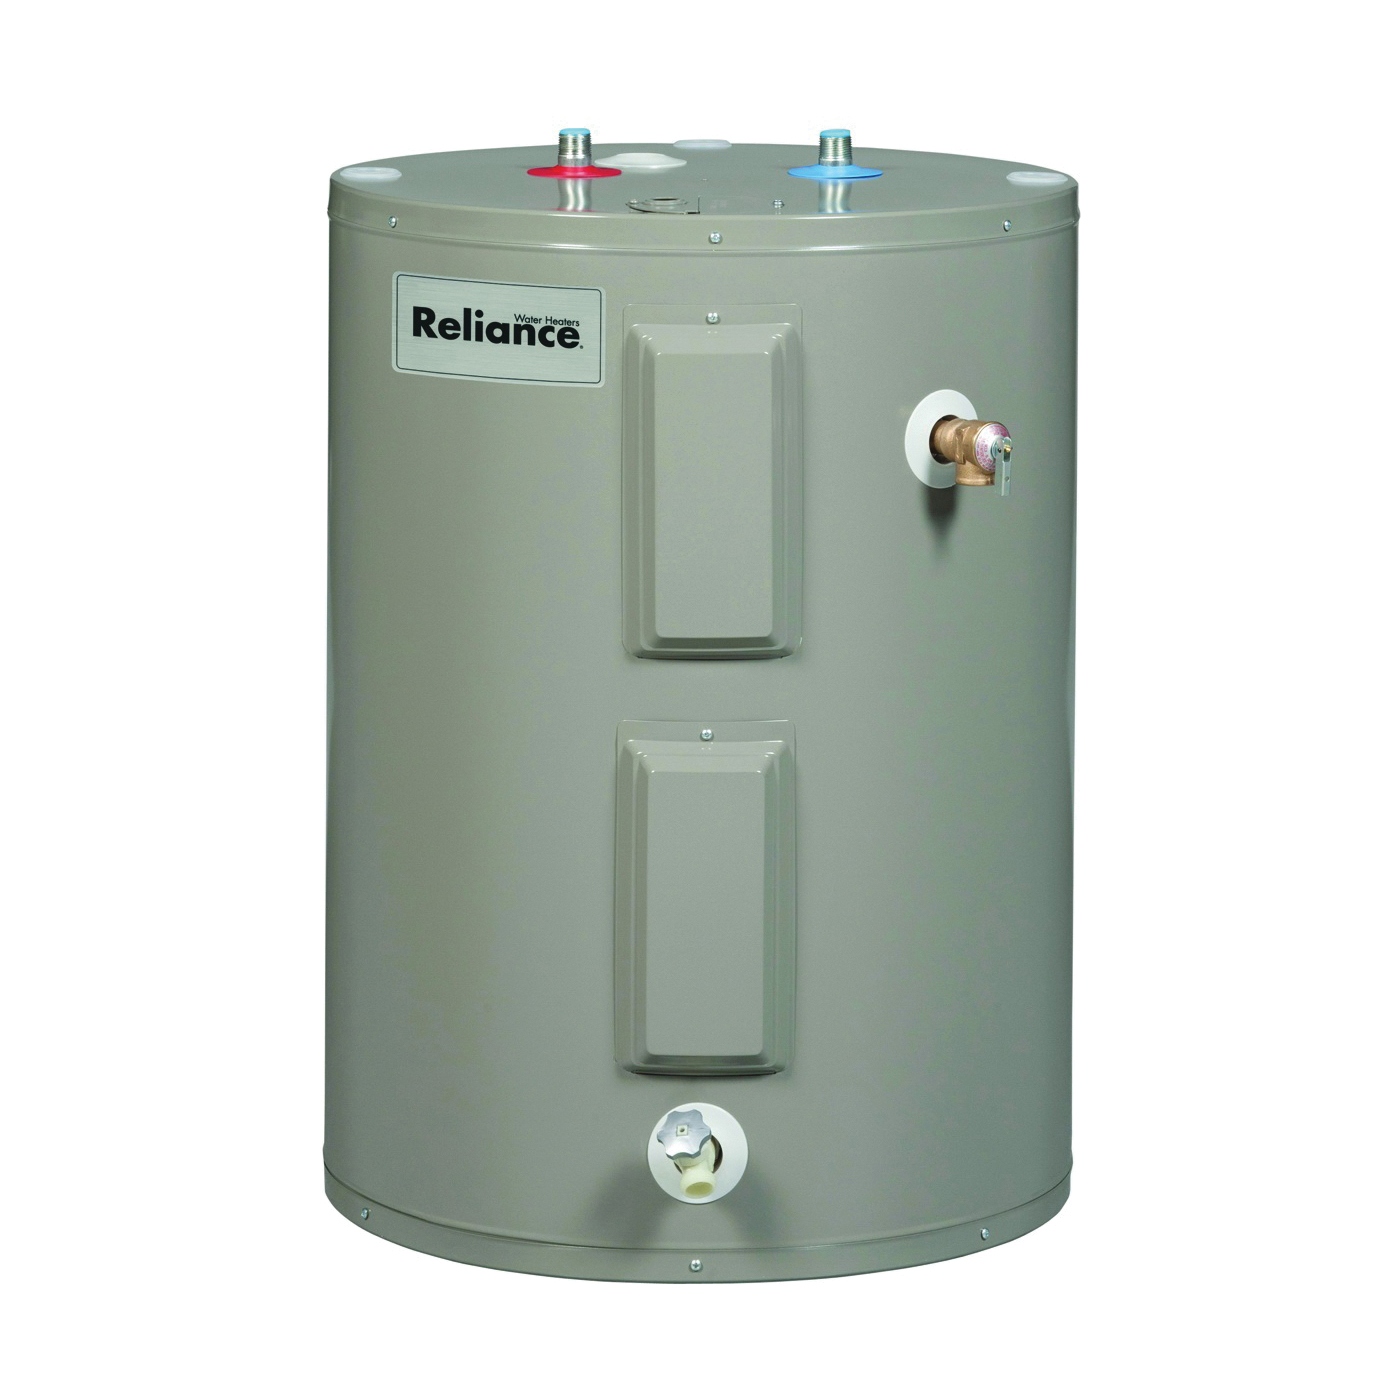 6 50 EORS Electric Water Heater, 30 A, 240 V, 6000 W, 50 gal Tank, 92 % Energy Efficiency